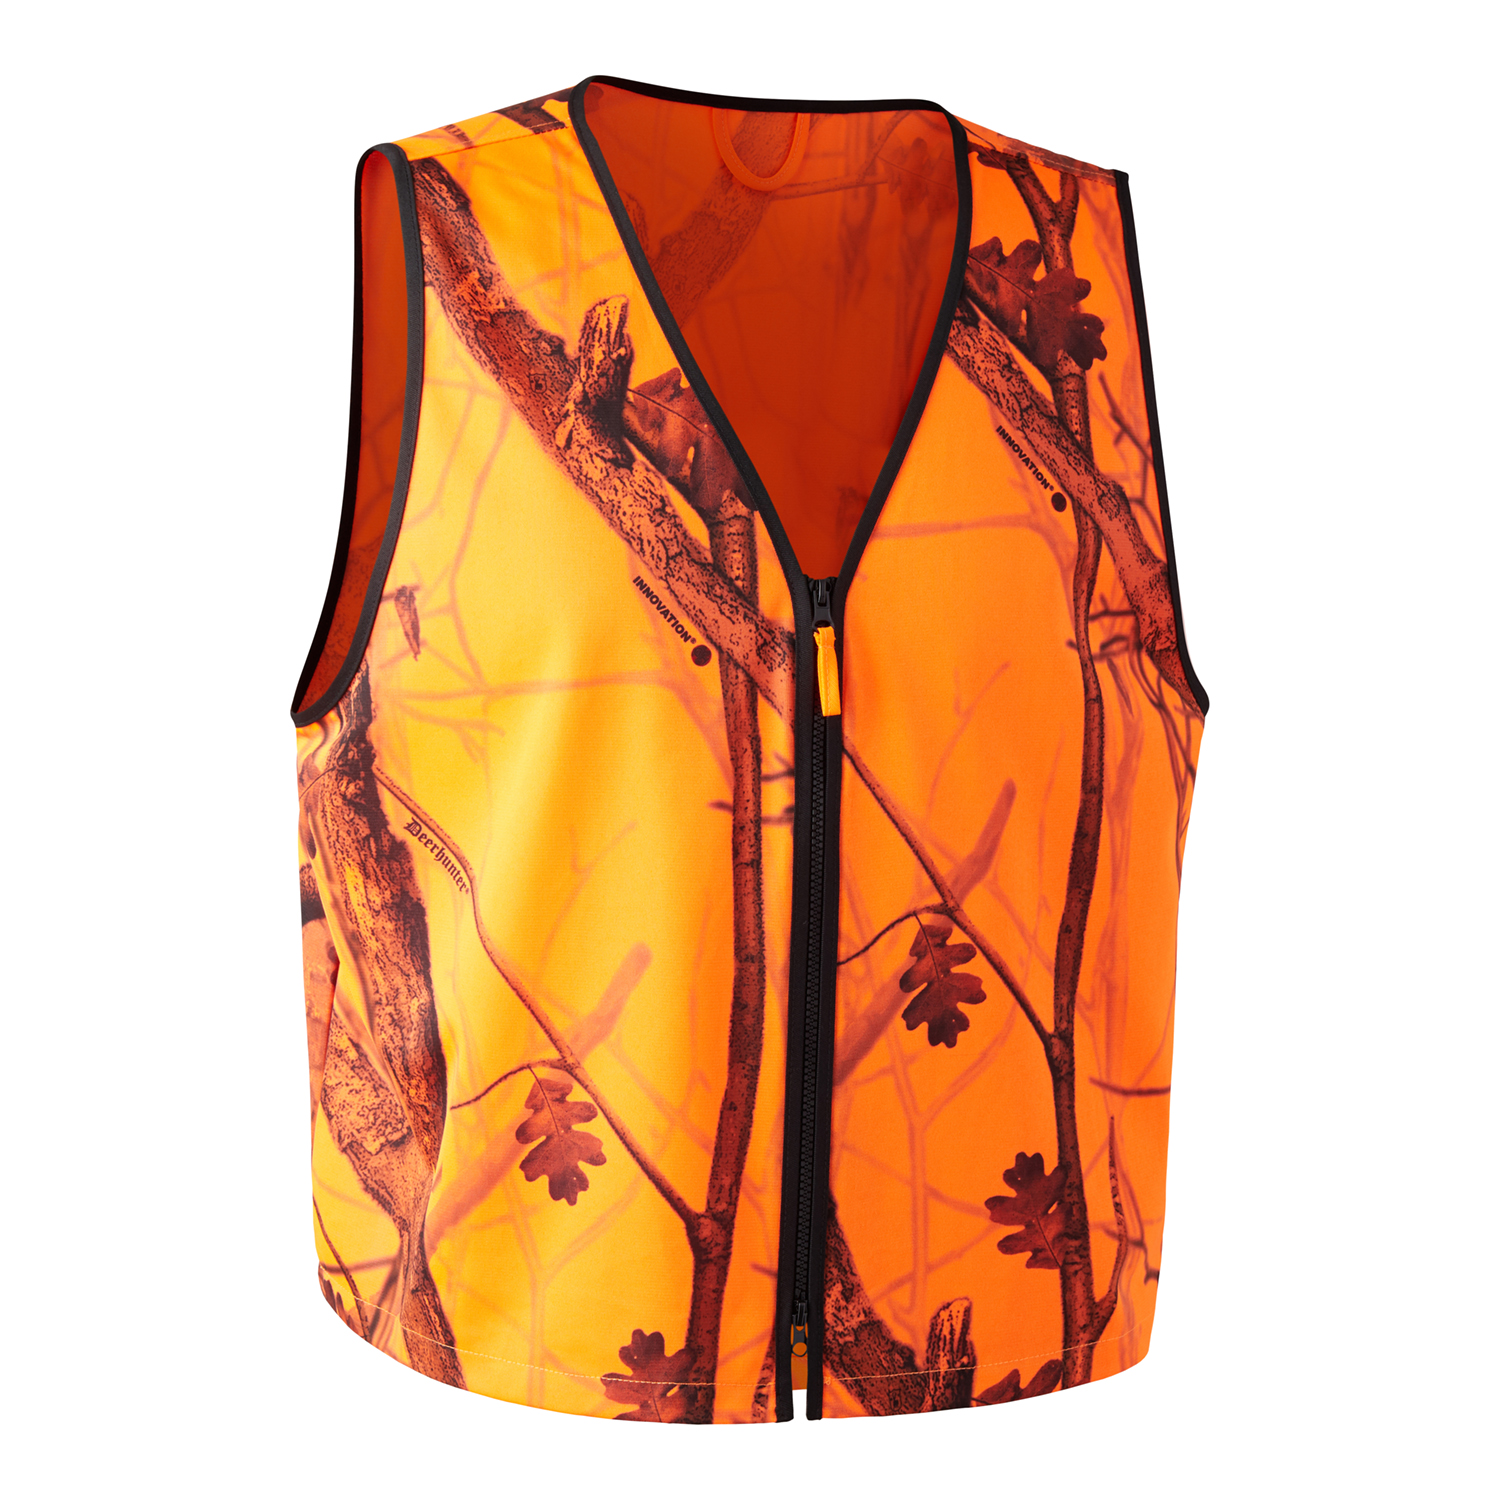 Protector Pull-over Vest - Orange GH Camo - 2XL thumbnail